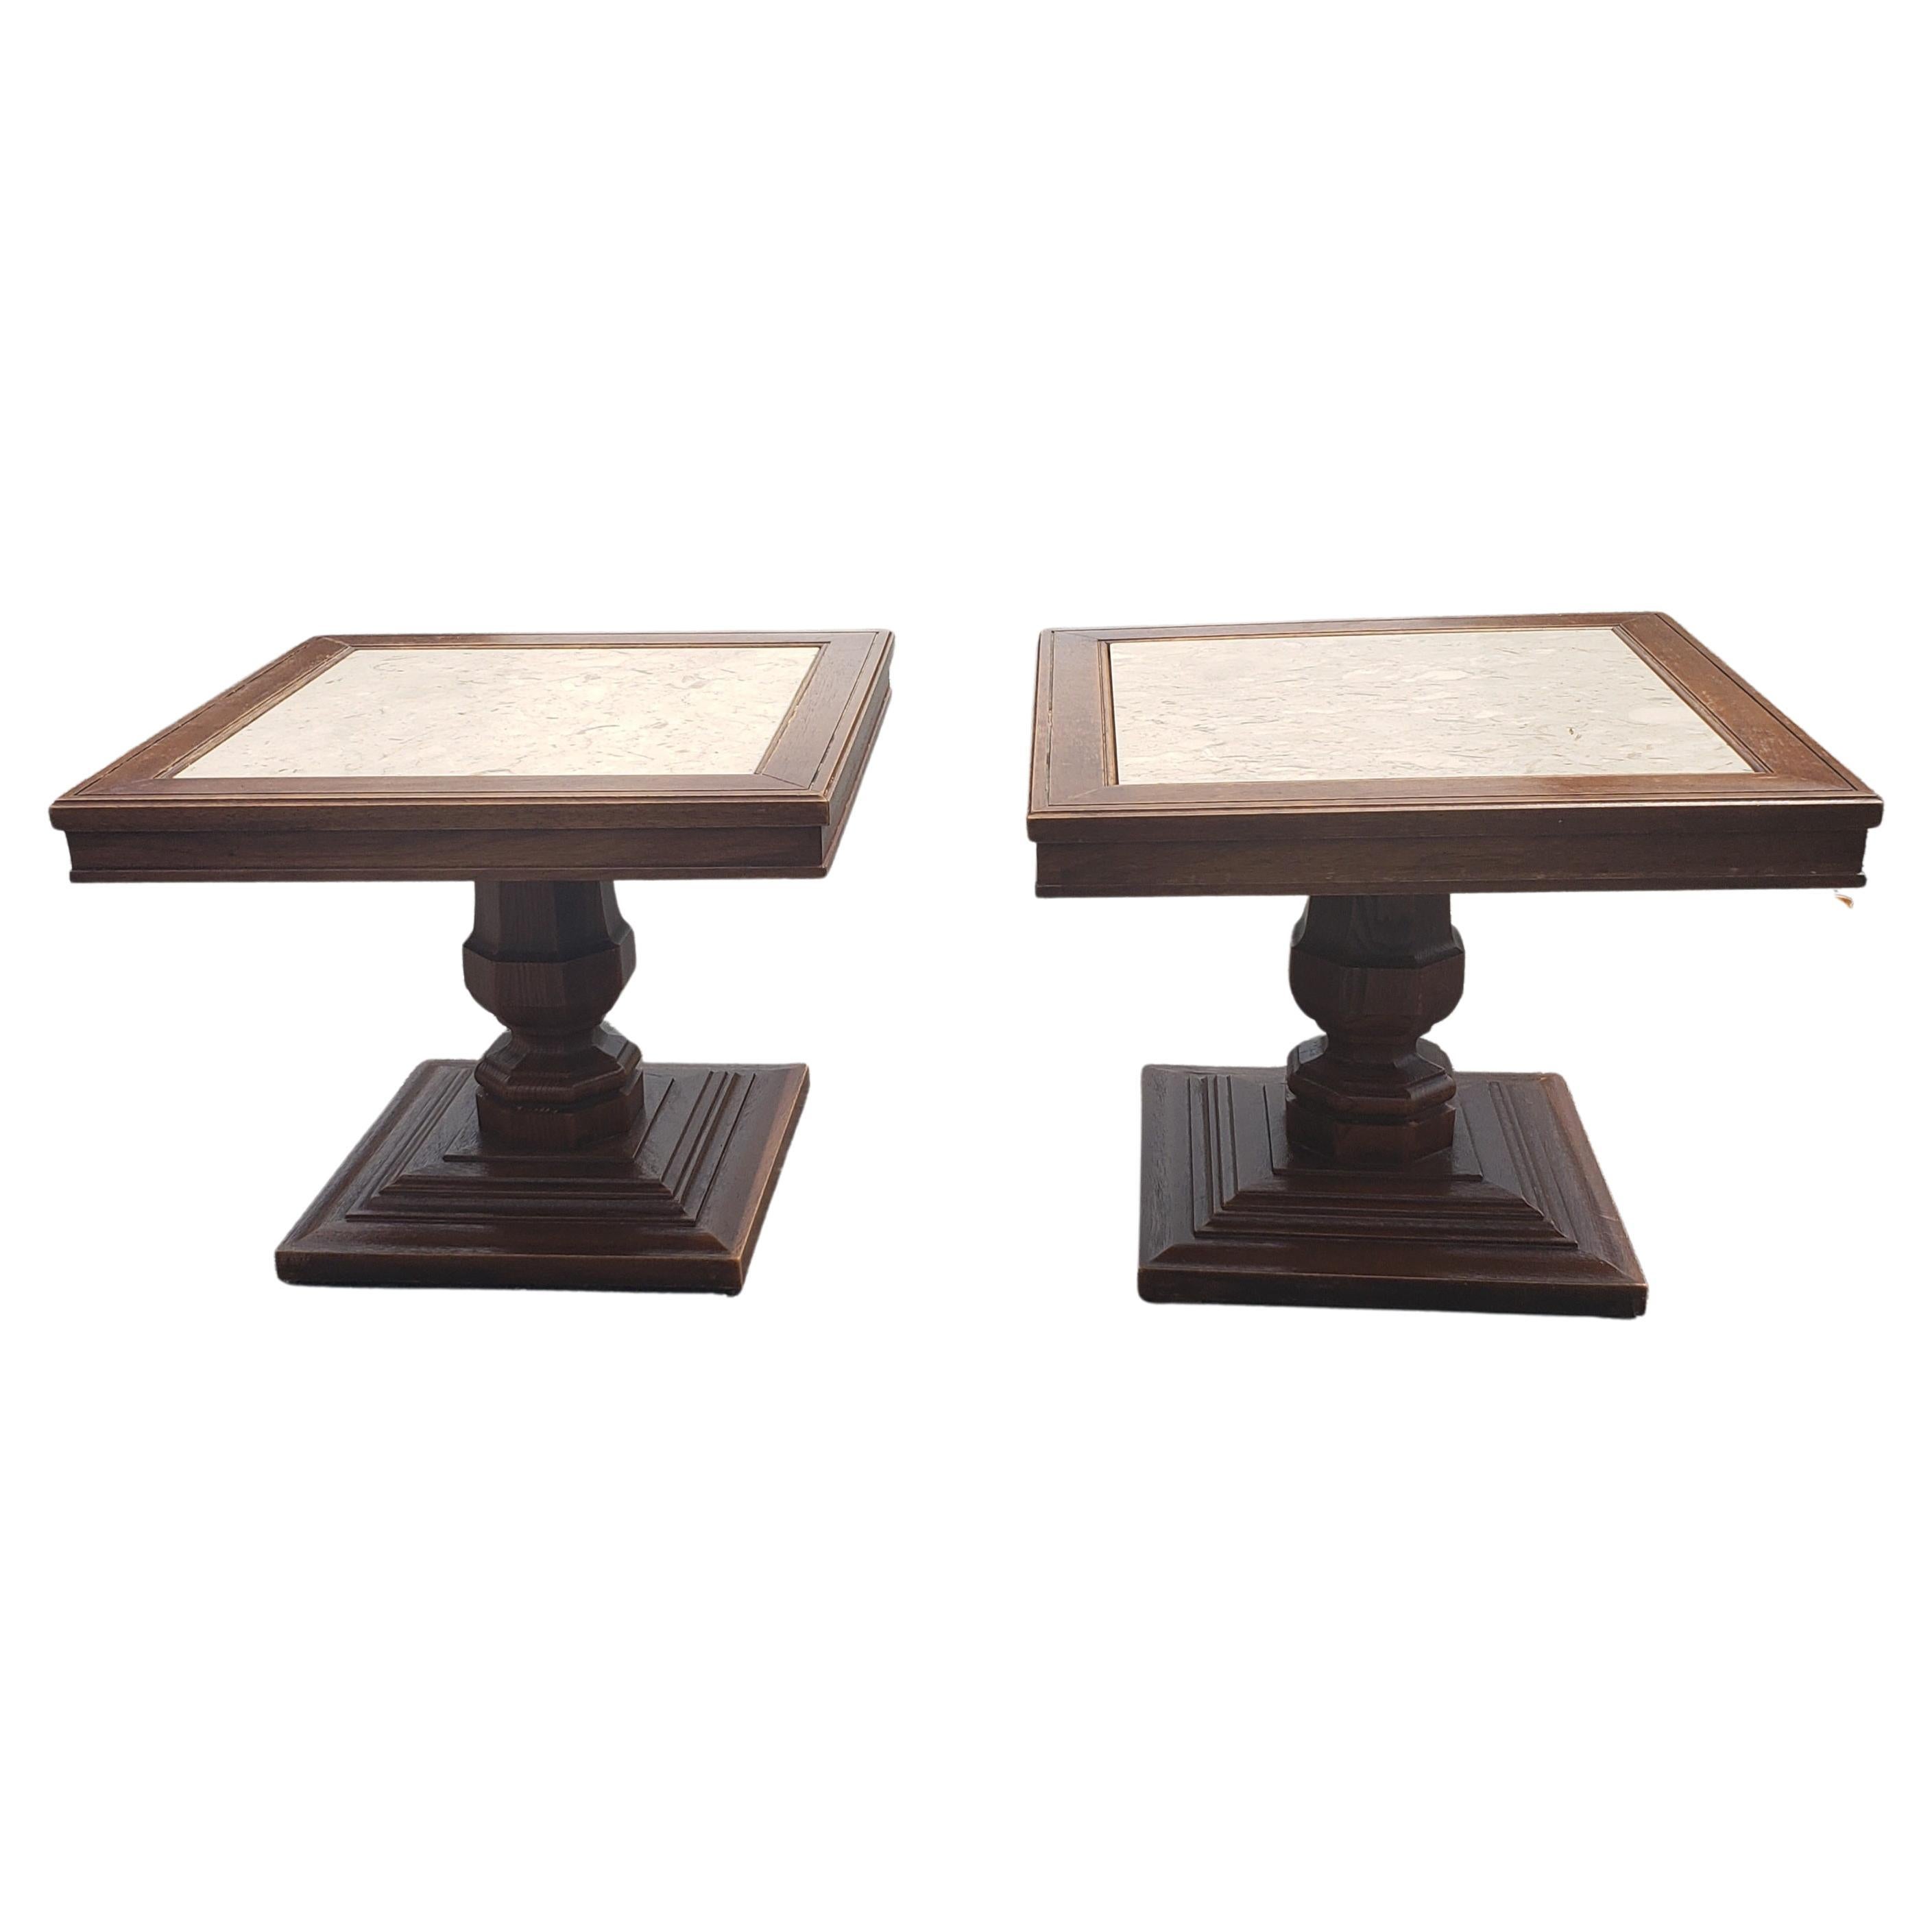 1960s Italian Pedestal Oak Side Tables with Marble Top Inserts, a Pair For Sale 2